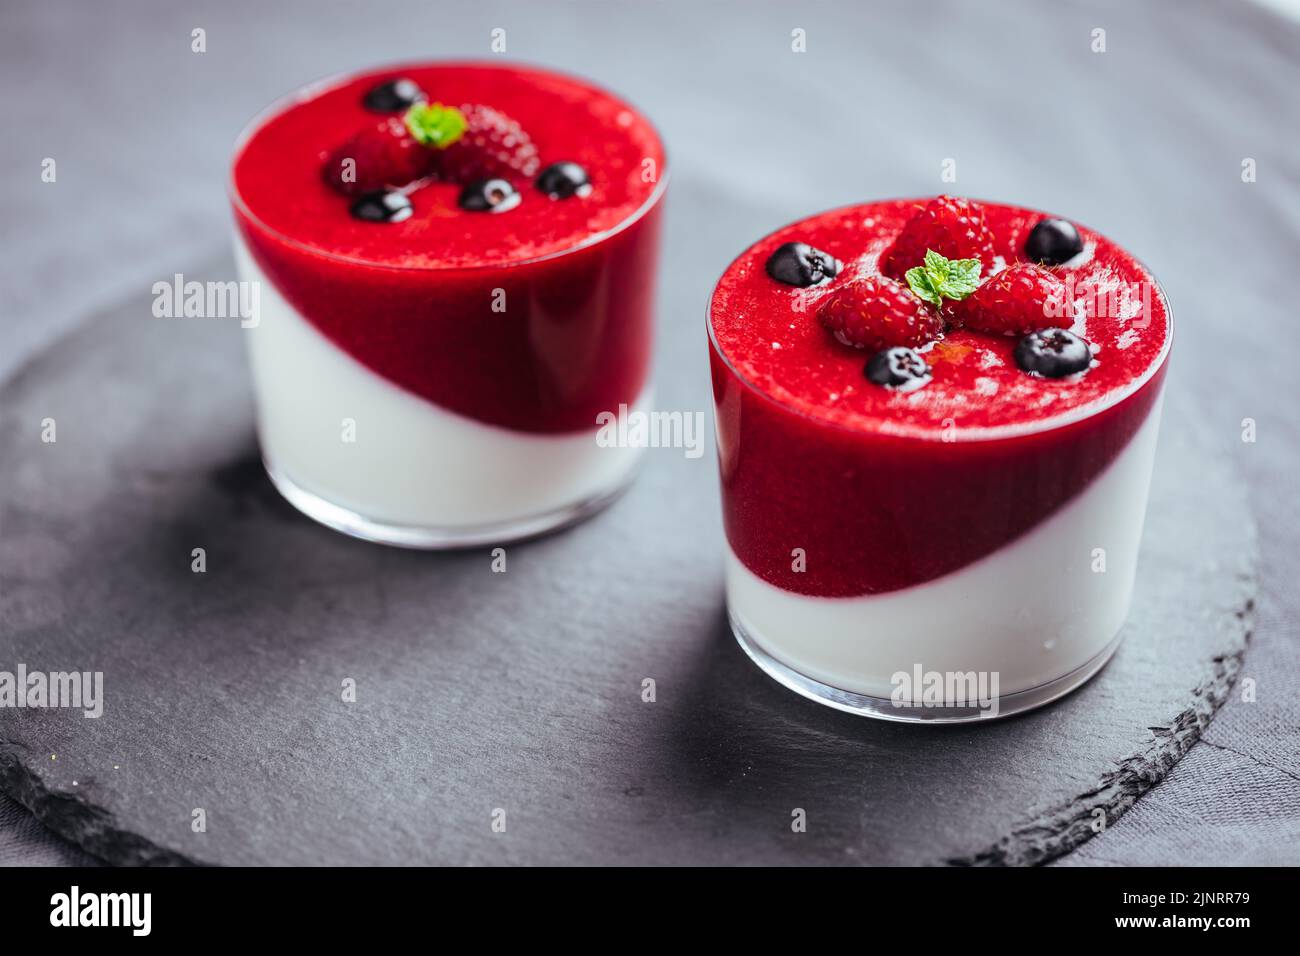 Panna cotta dessert with sauce from berries. Cherries, raspberries and blueberry as decoration. Served in two glasses on bright white background. Trad Stock Photo